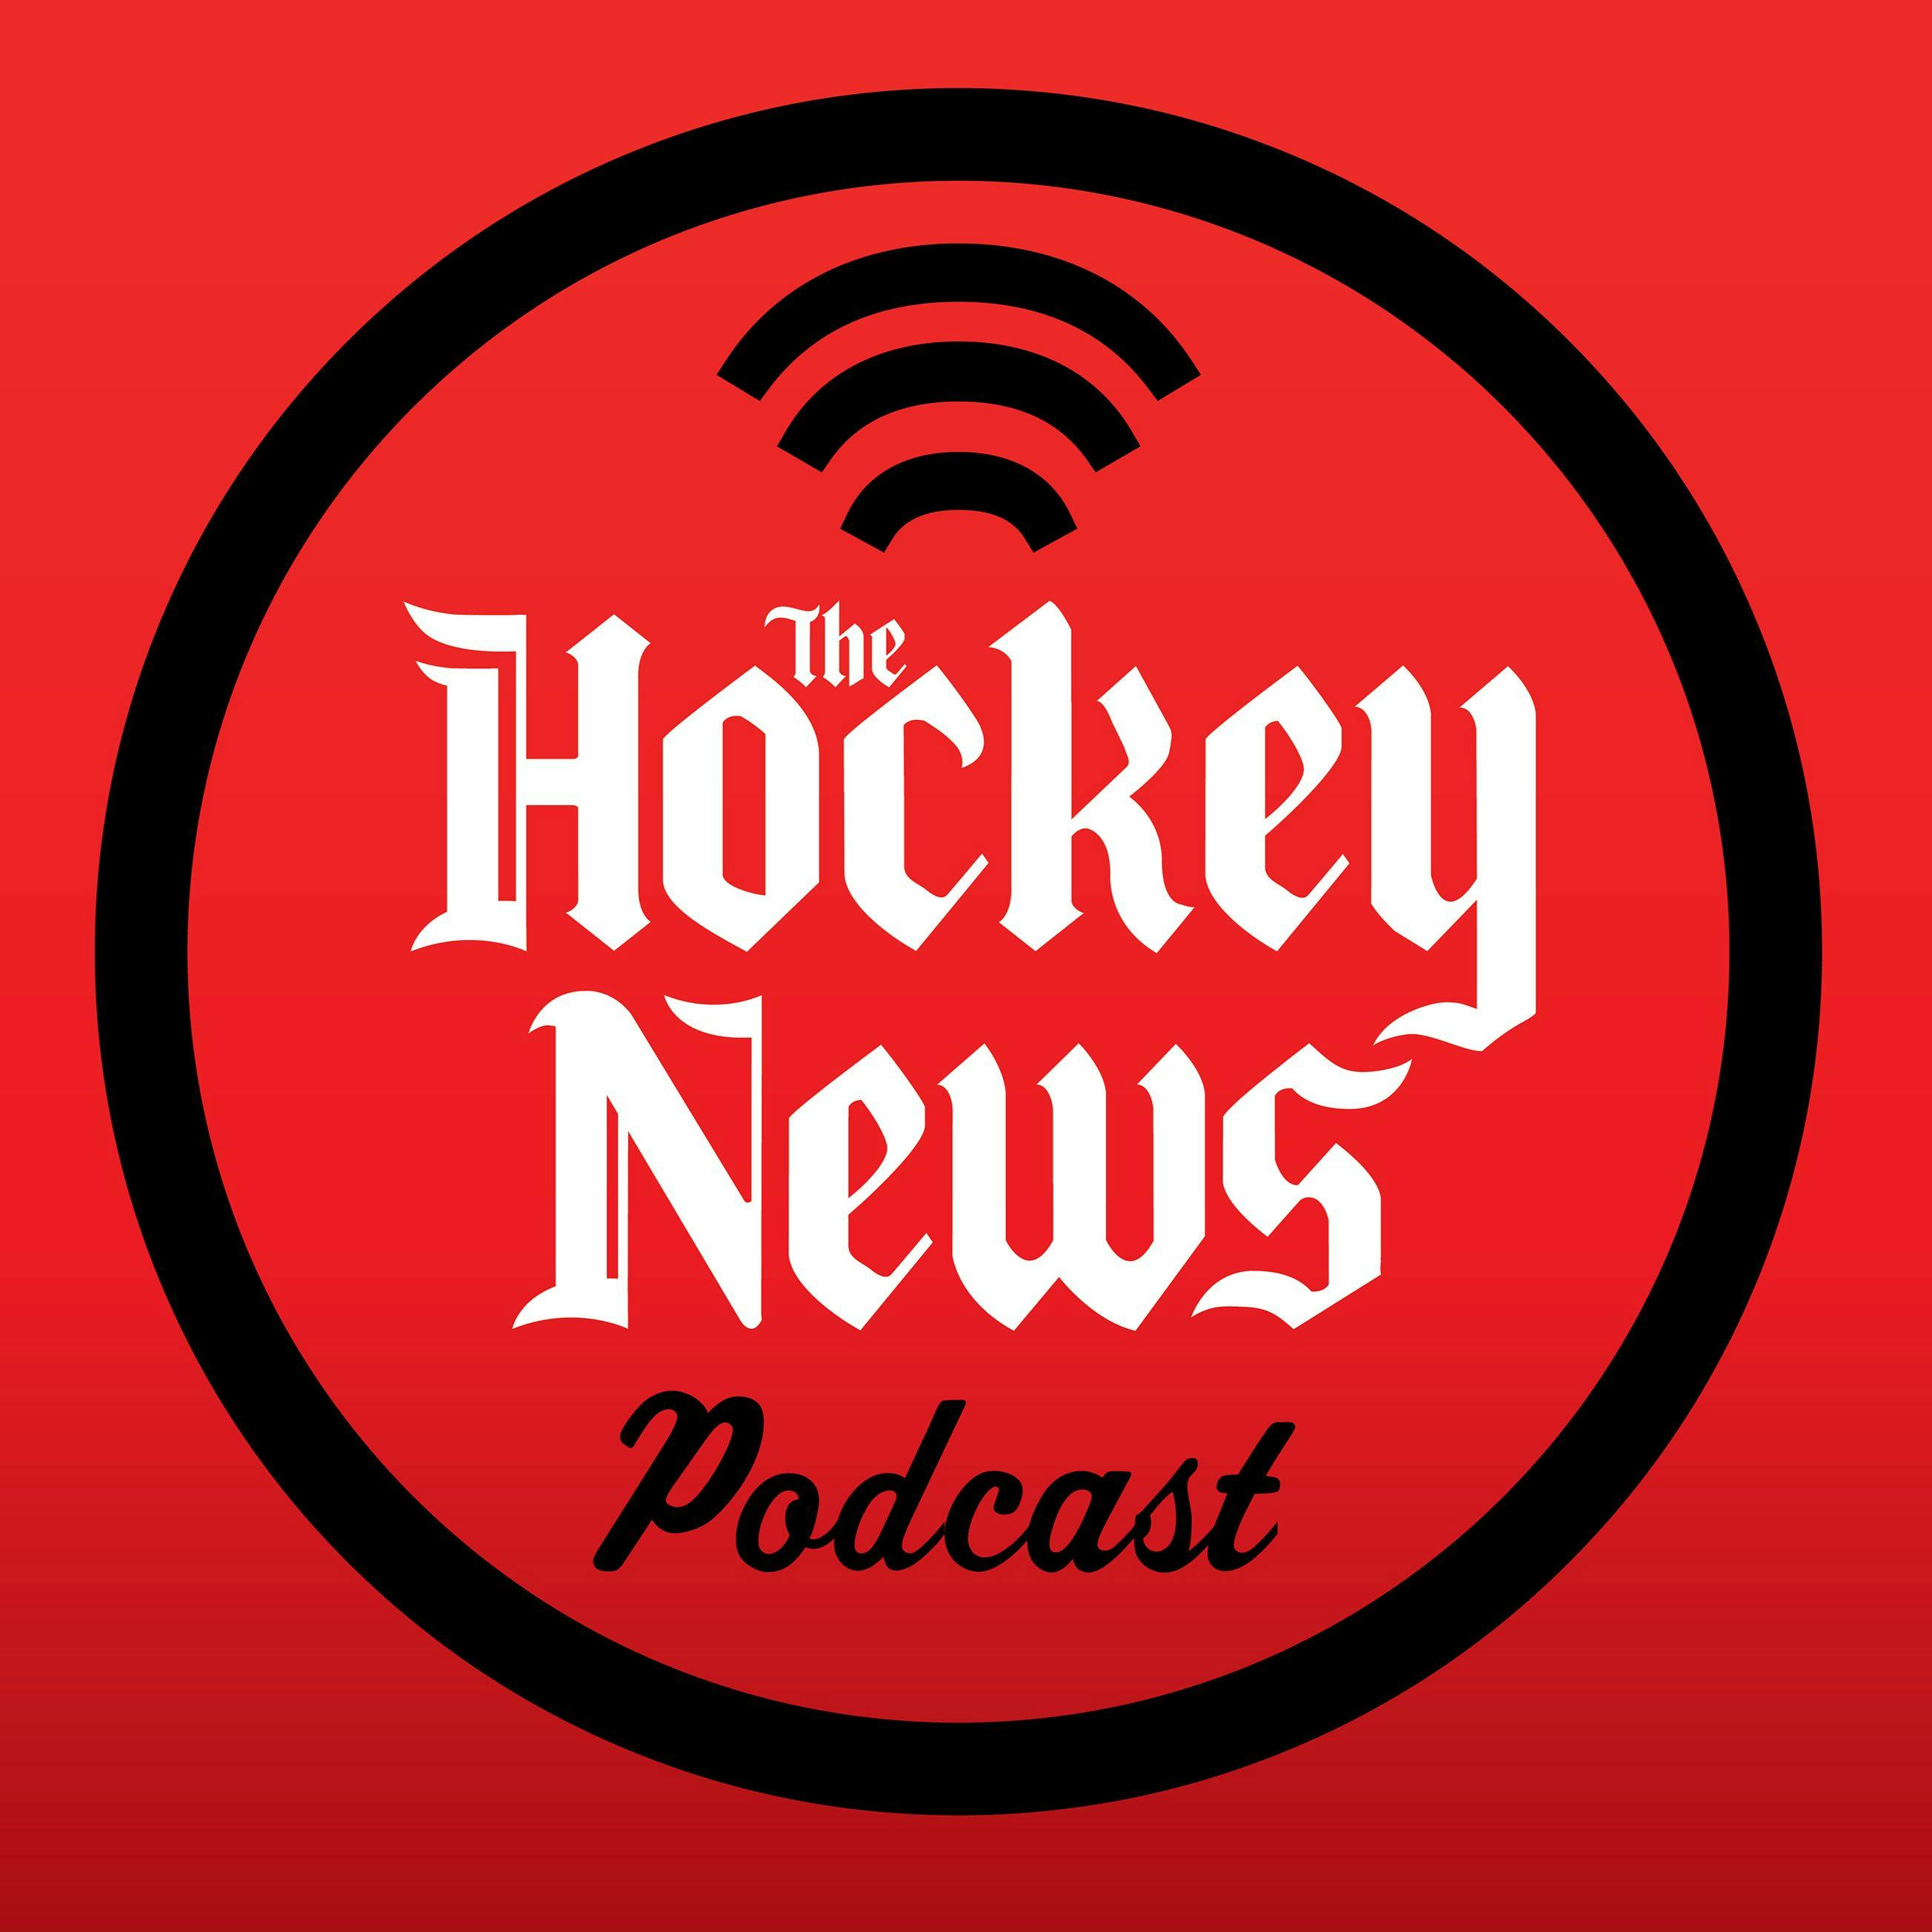 The Hockey News Podcast: Is Tom Wilson too Dangerous for the NHL?